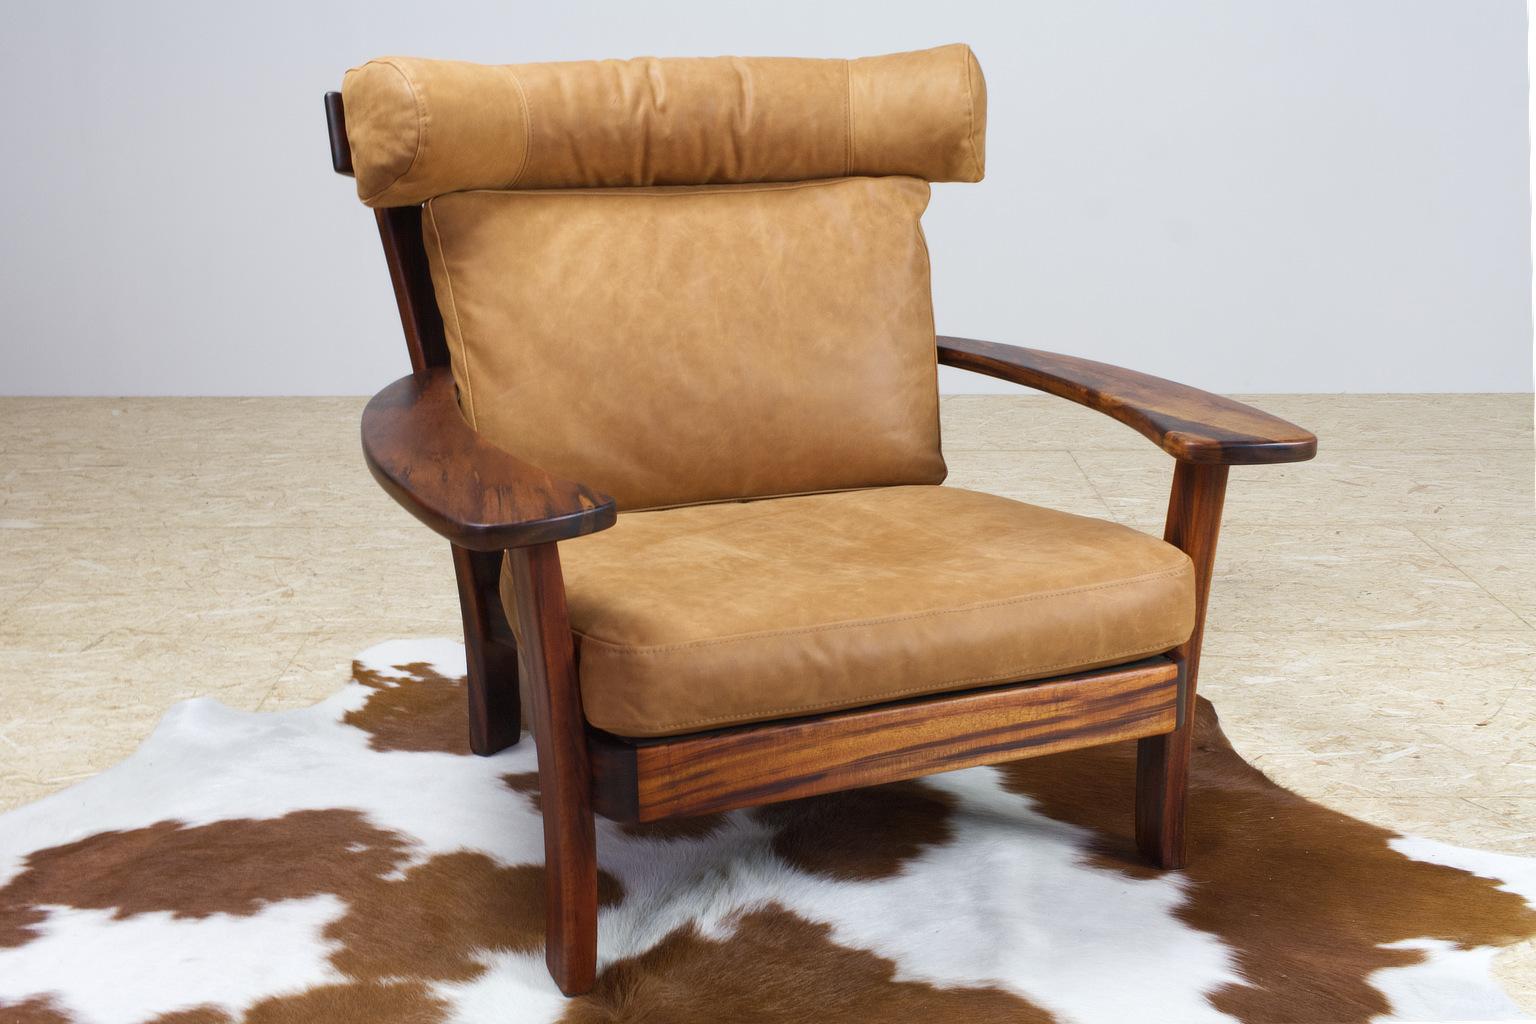 Dutch Large Brutalist Midcentury Rosewood and Leather 'Ox' Lounge Chair, 1960s For Sale